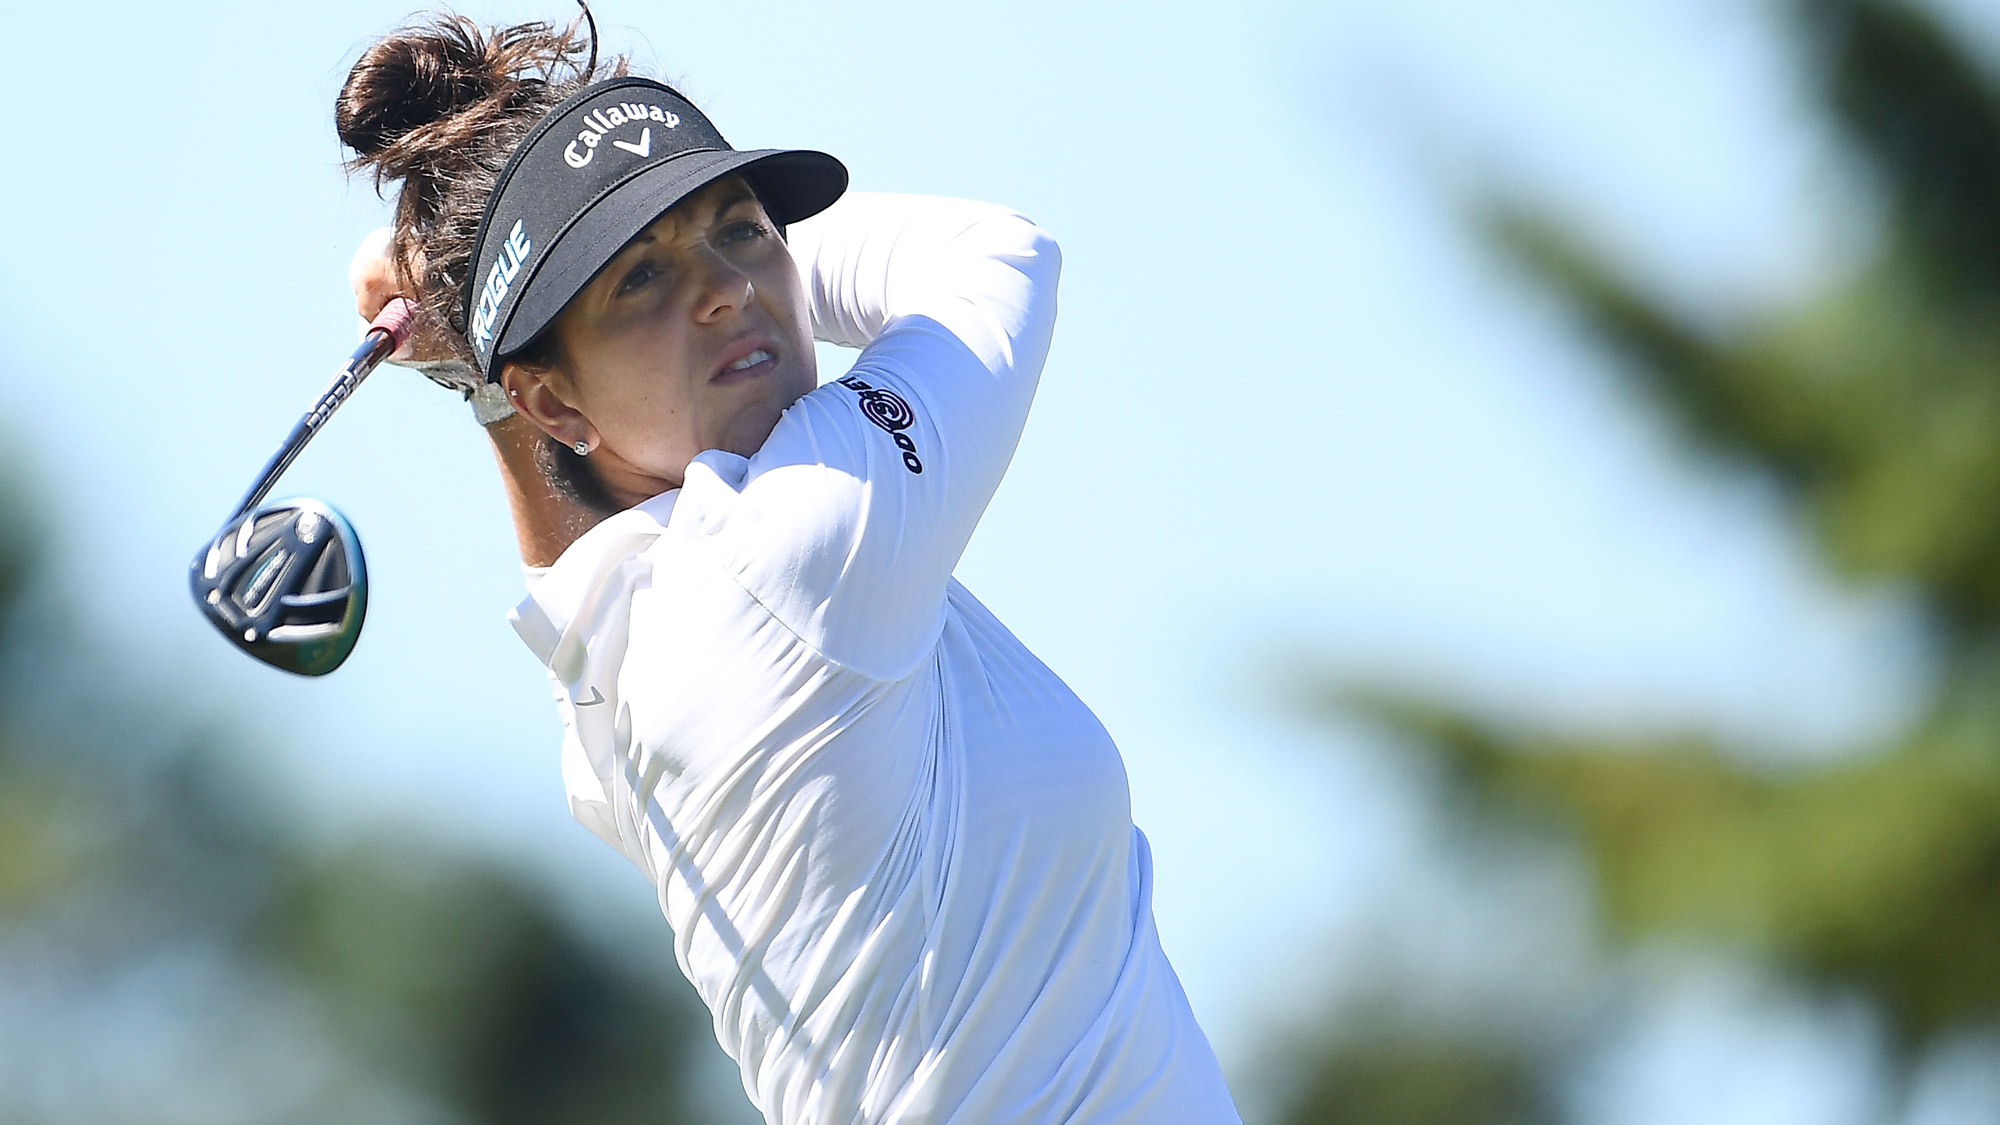 Emma Talley Swings on Friday at the Thornberry Creek LPGA Classic